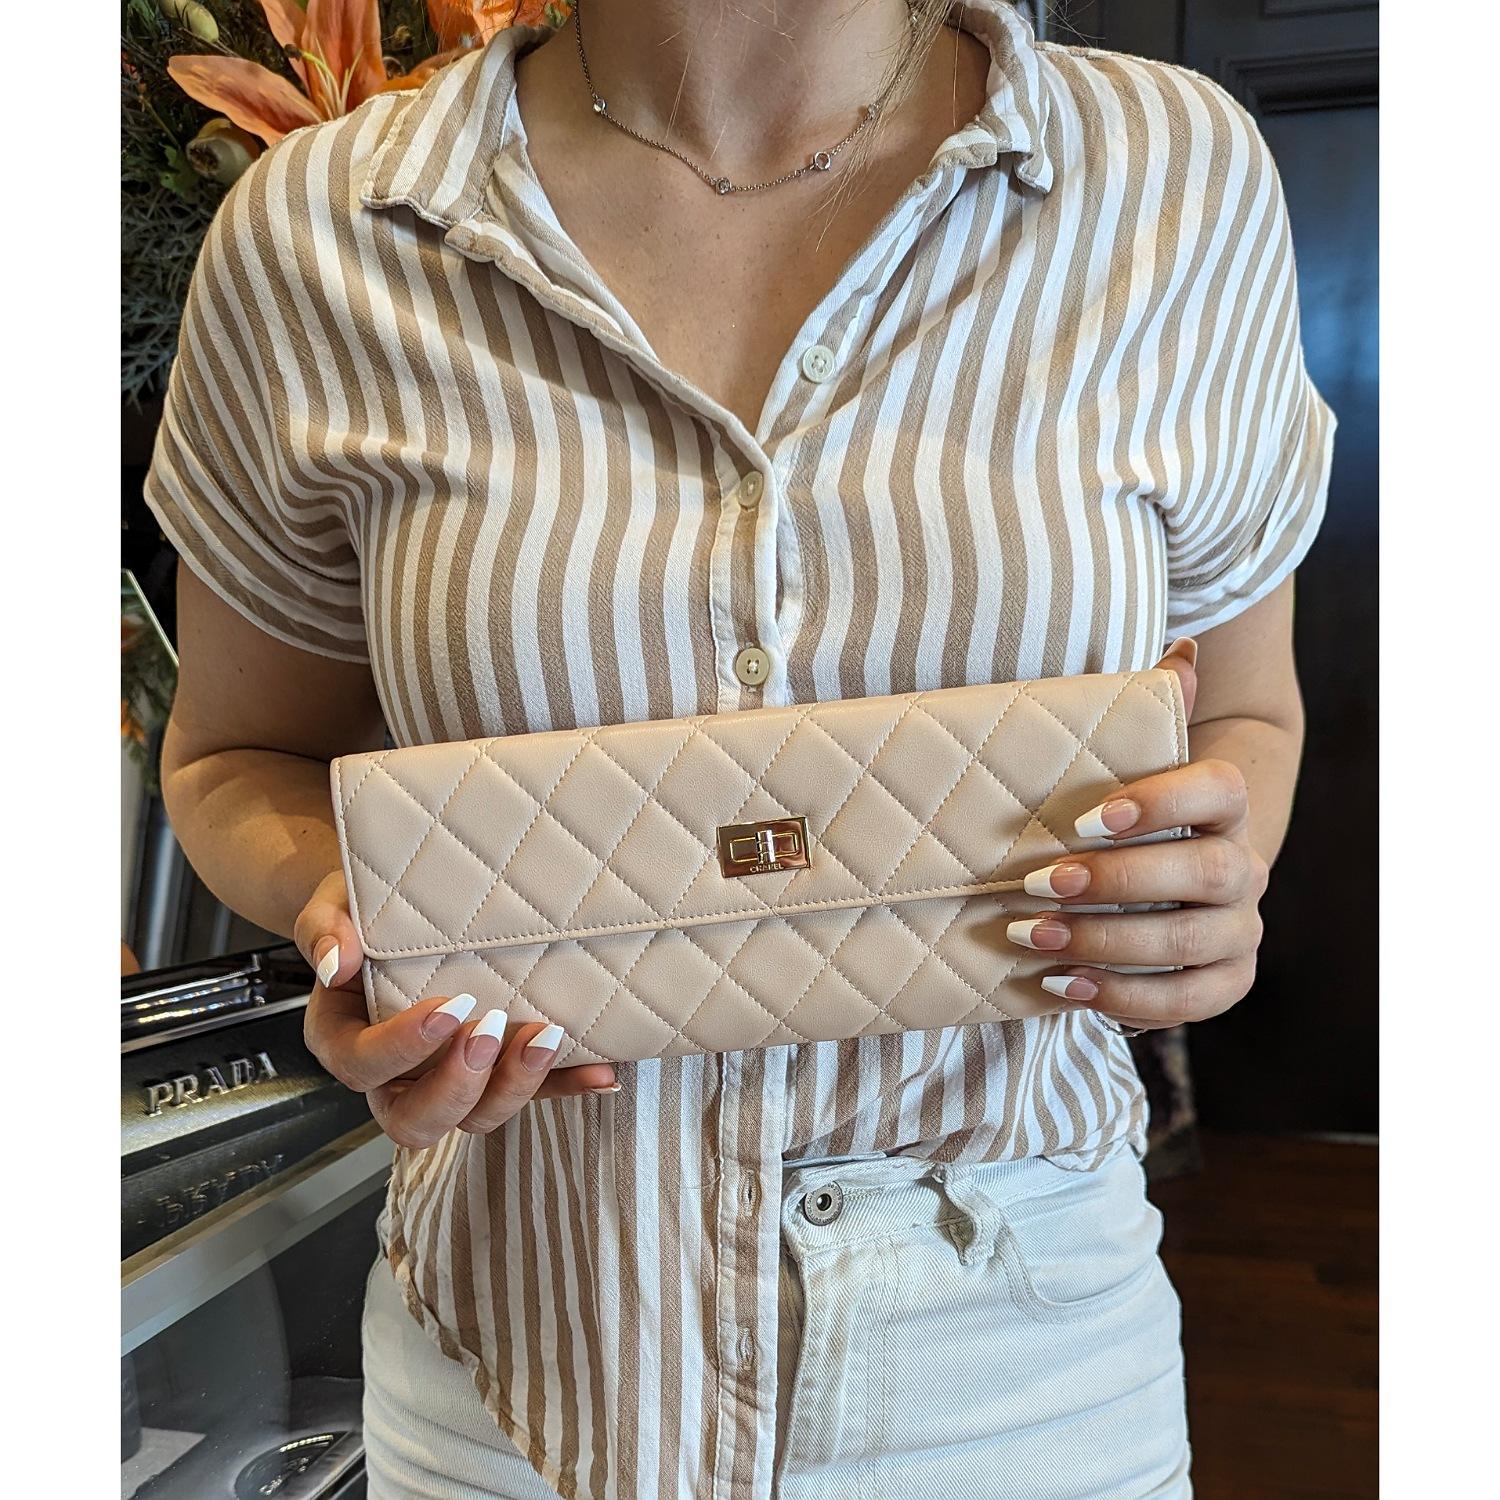 Crafted from luxurious light beige lambskin leather, this Chanel 2.55 jewelry case is a timeless piece for the discerning collector. The iconic quilted design and polished gold-tone hardware echo the classic elegance of the Chanel 2.55 clutch. This